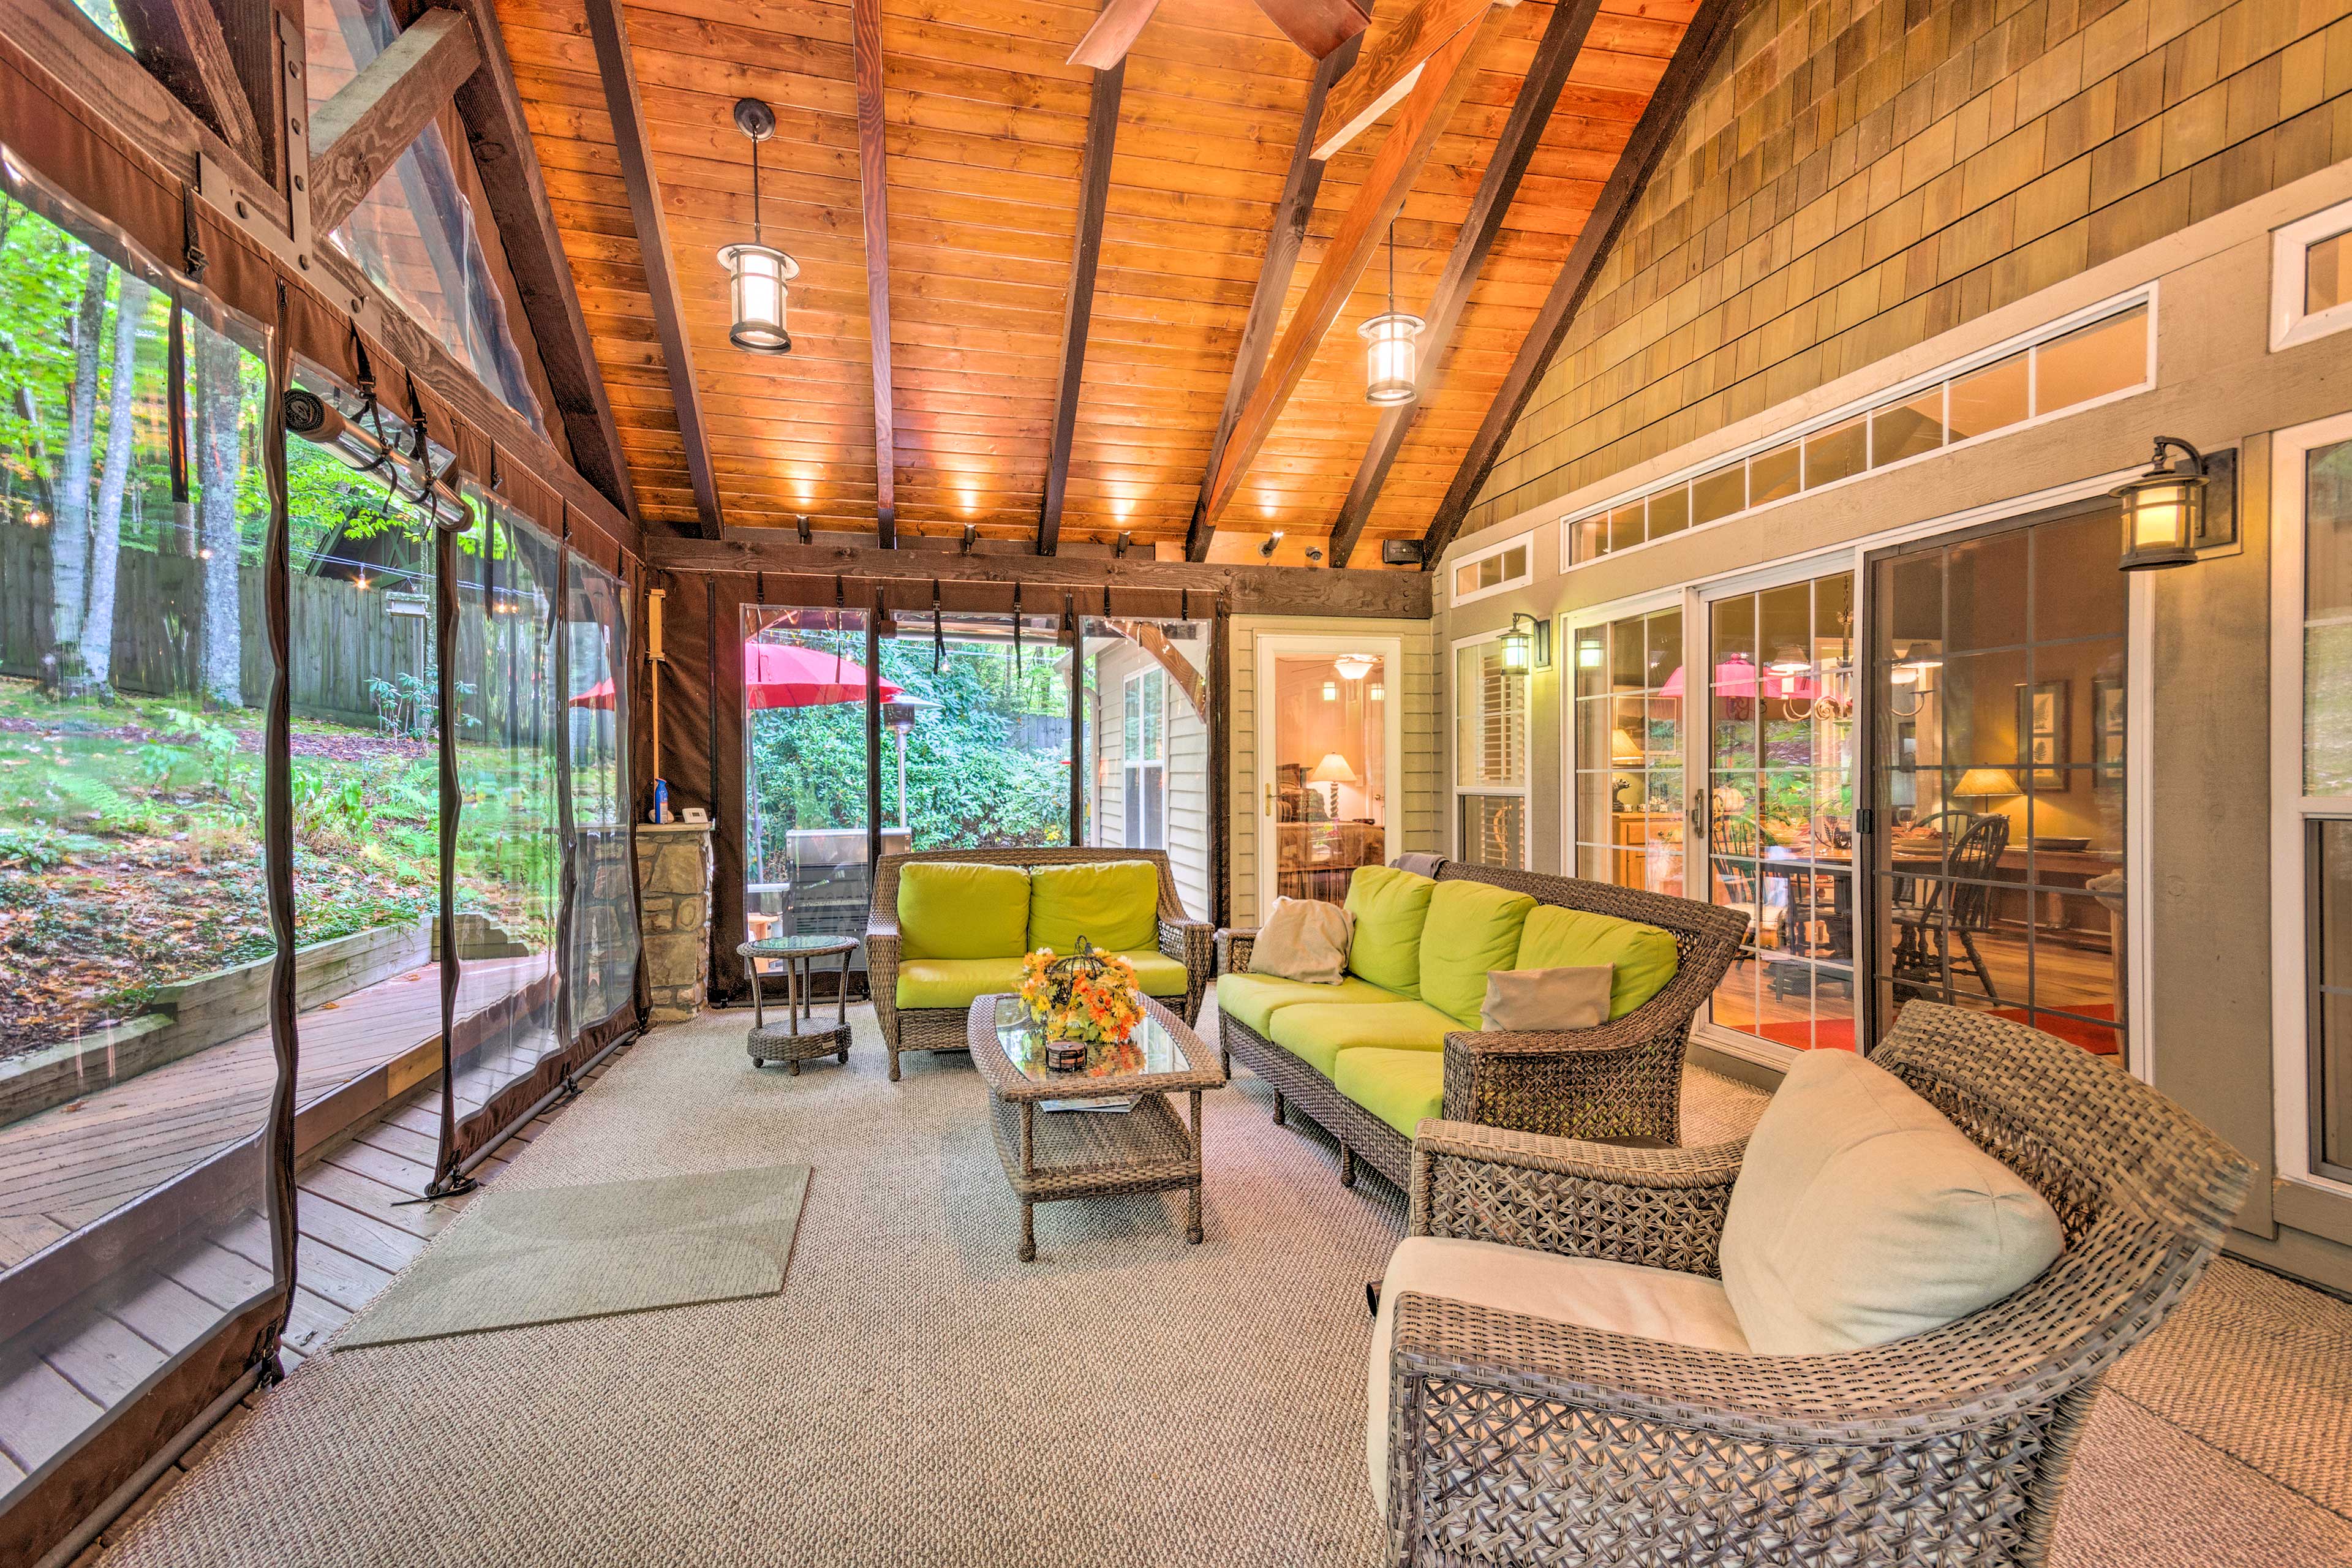 Step outside to unwind in the massive screened porch.